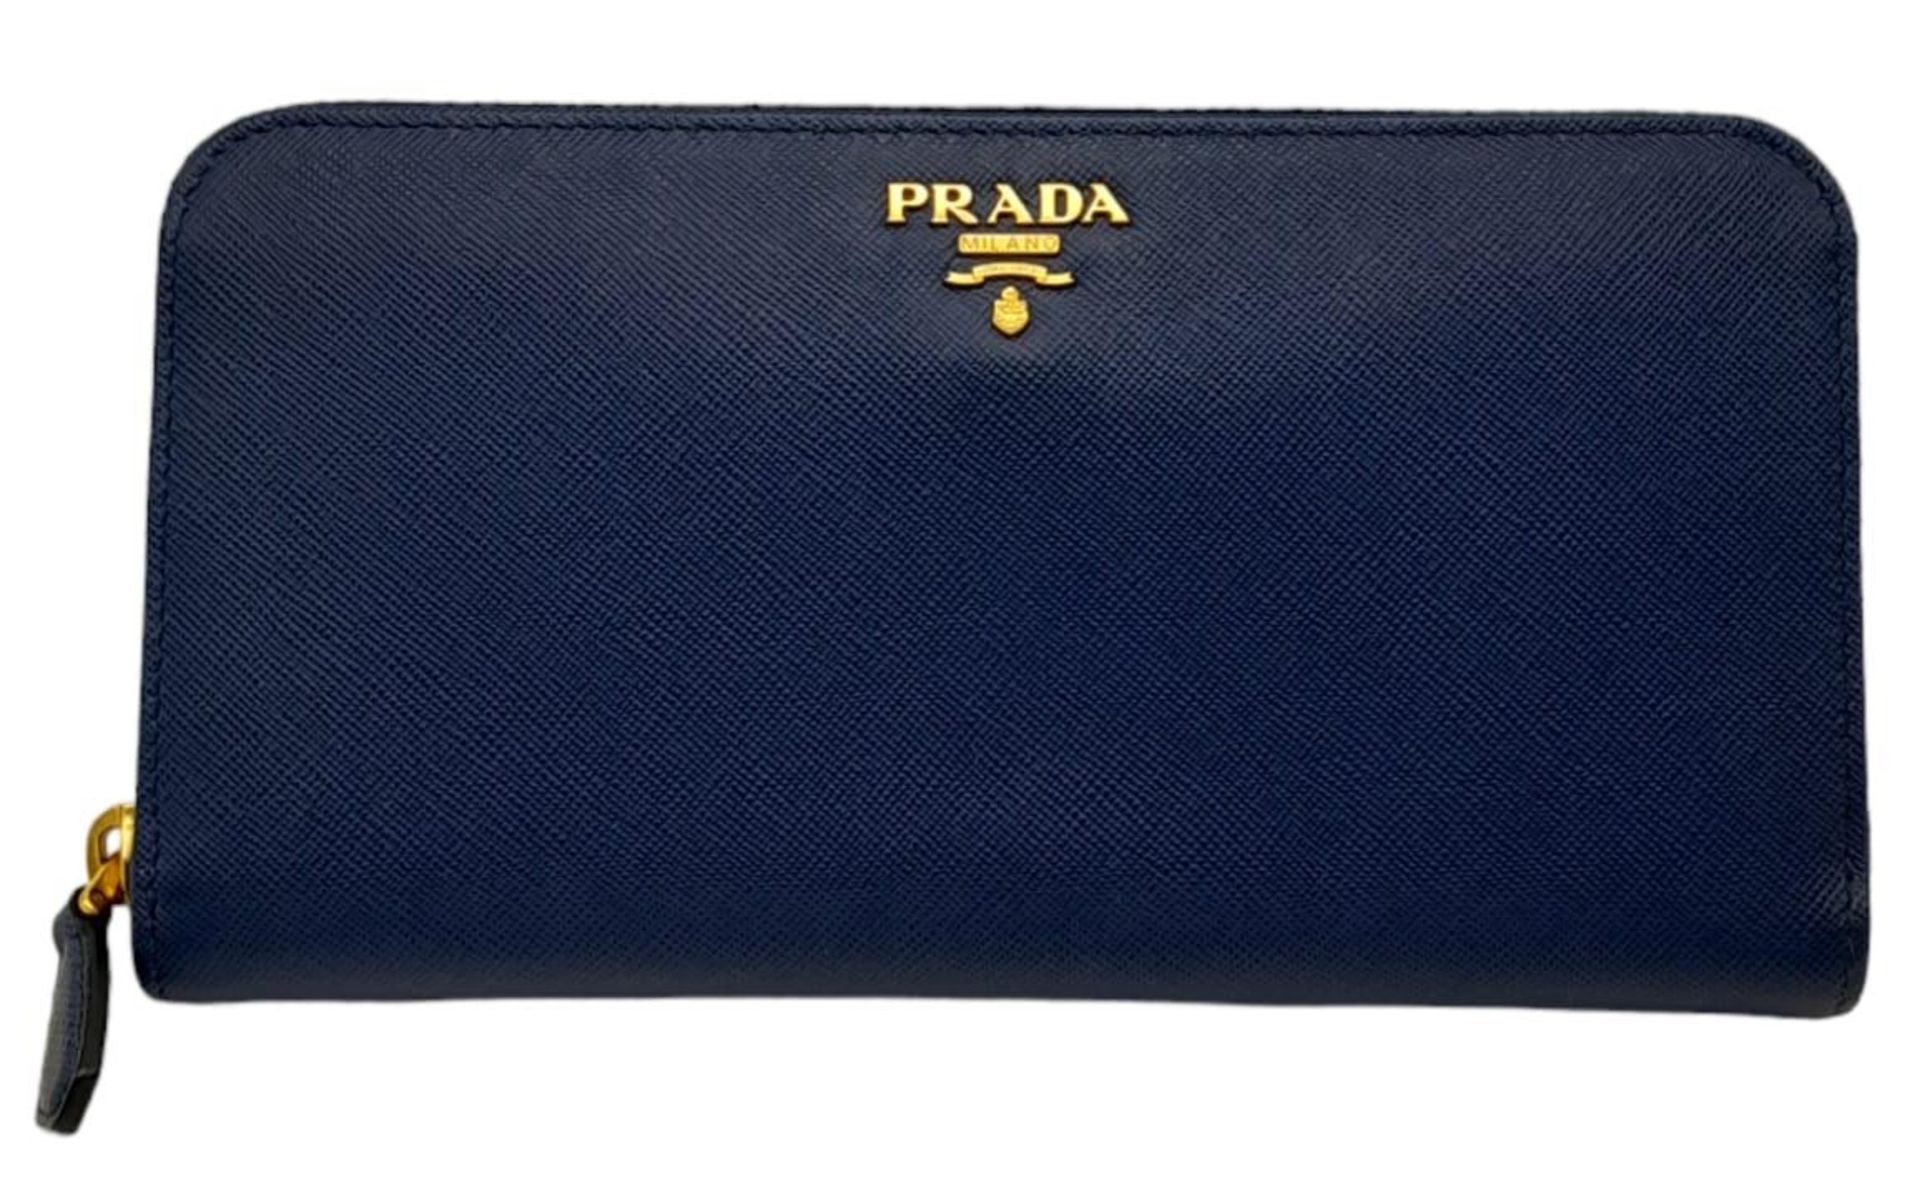 A Prada Royal Blue Purse/Wallet. Saffiano leather exterior, with the Prada logo in gold-toned